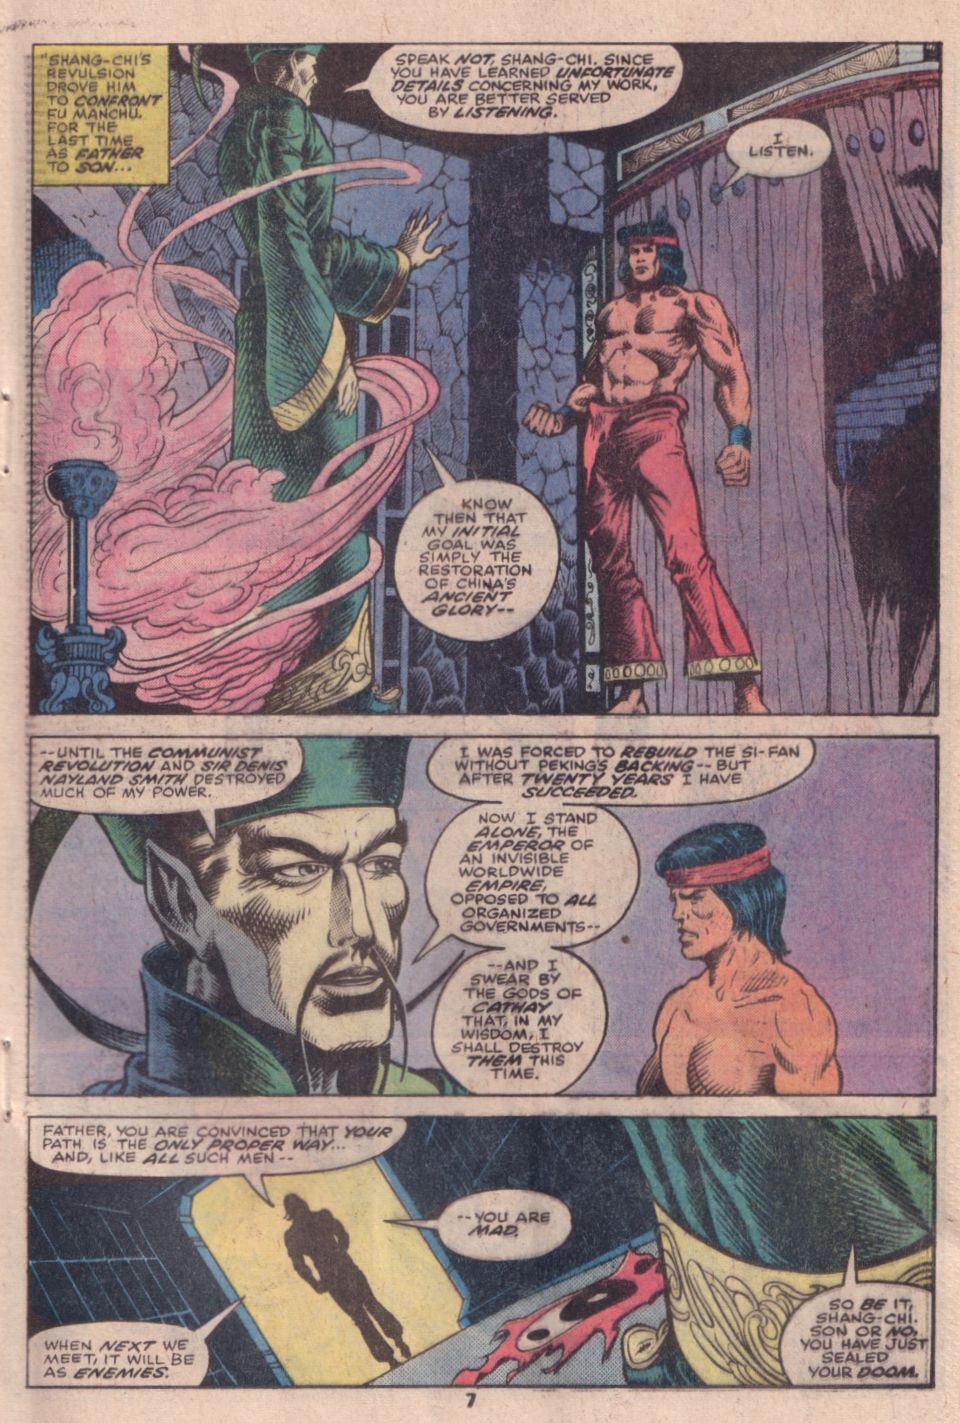 What If? (1977) Issue #16 - Shang Chi Master of Kung Fu fought on The side of Fu Manchu #16 - English 6